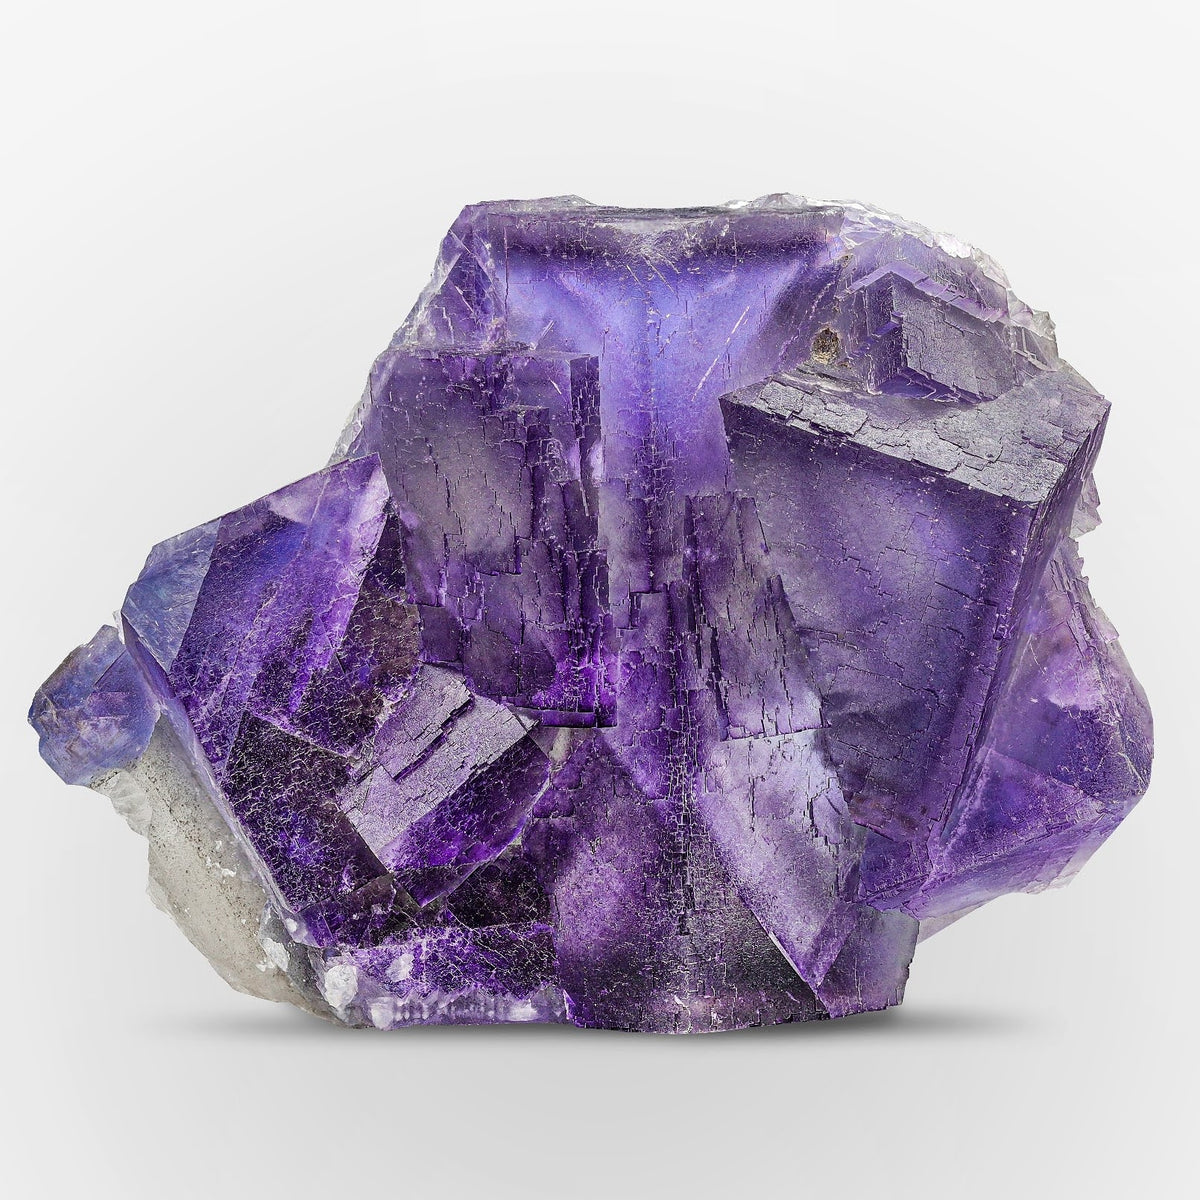 twinned cluster of vibrant purple color Fluorite crystals from Pakistan